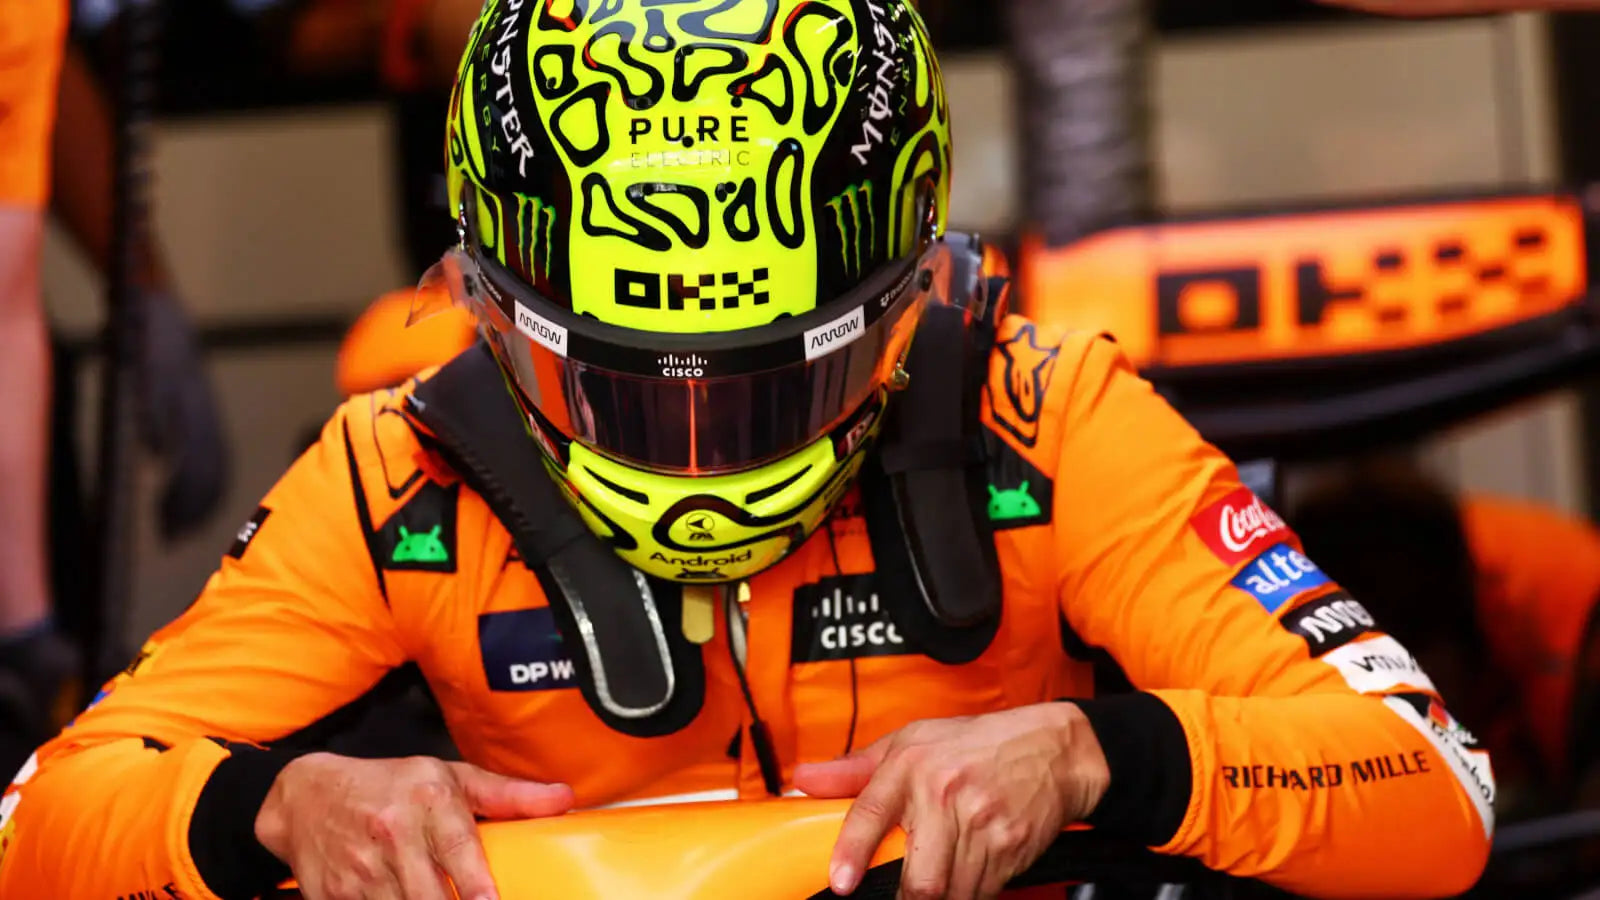 Lando Norris reveals why Max Verstappen’s winning margin is actually ‘not concerning at all’